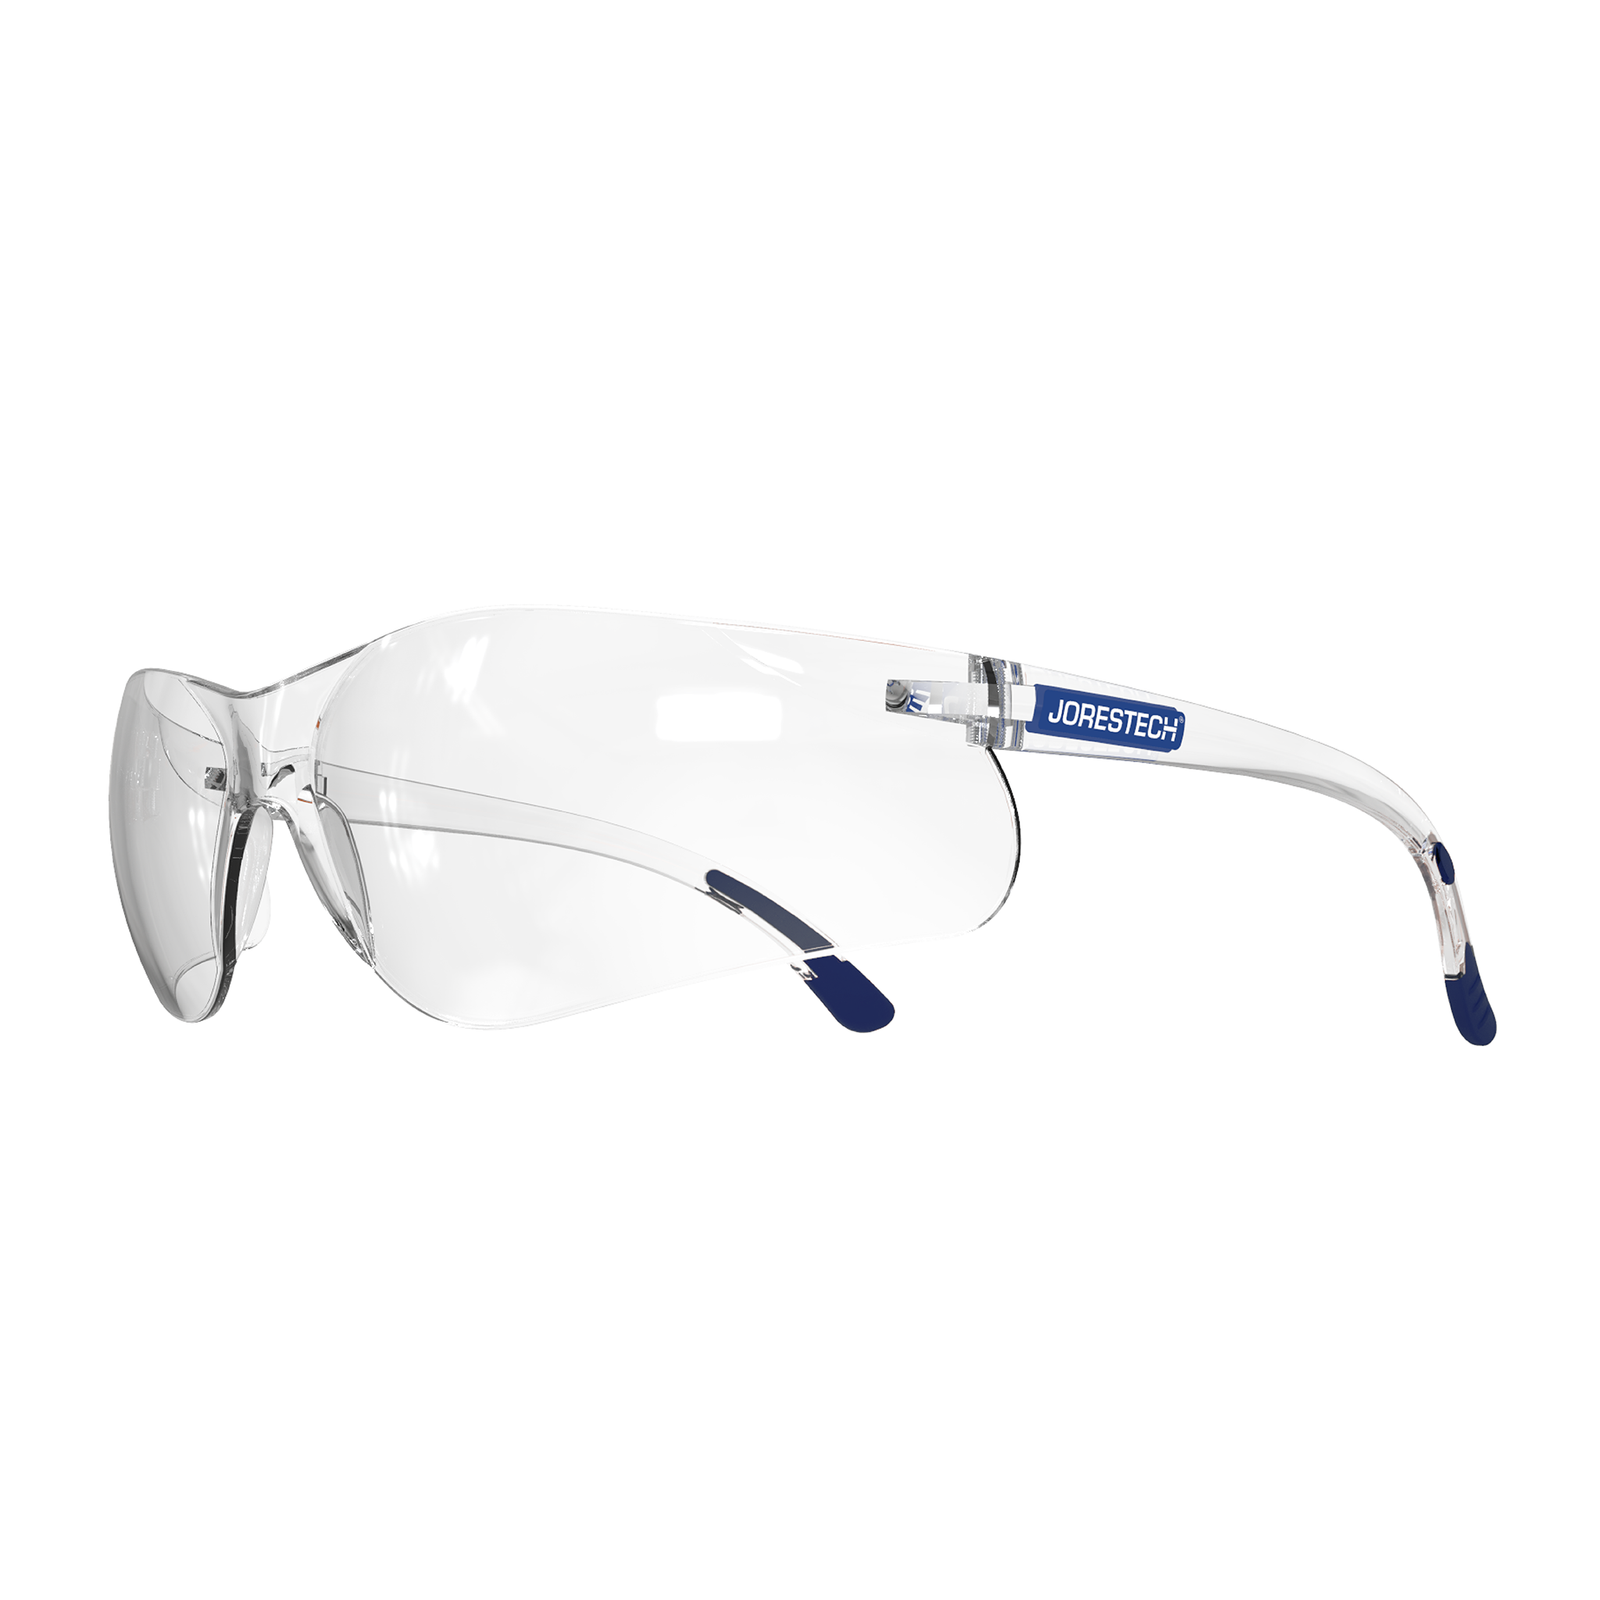 Diagonal view of the clear JORESTECH wraparound safety glasses for high impact protection with blue rubberized temple tips. 